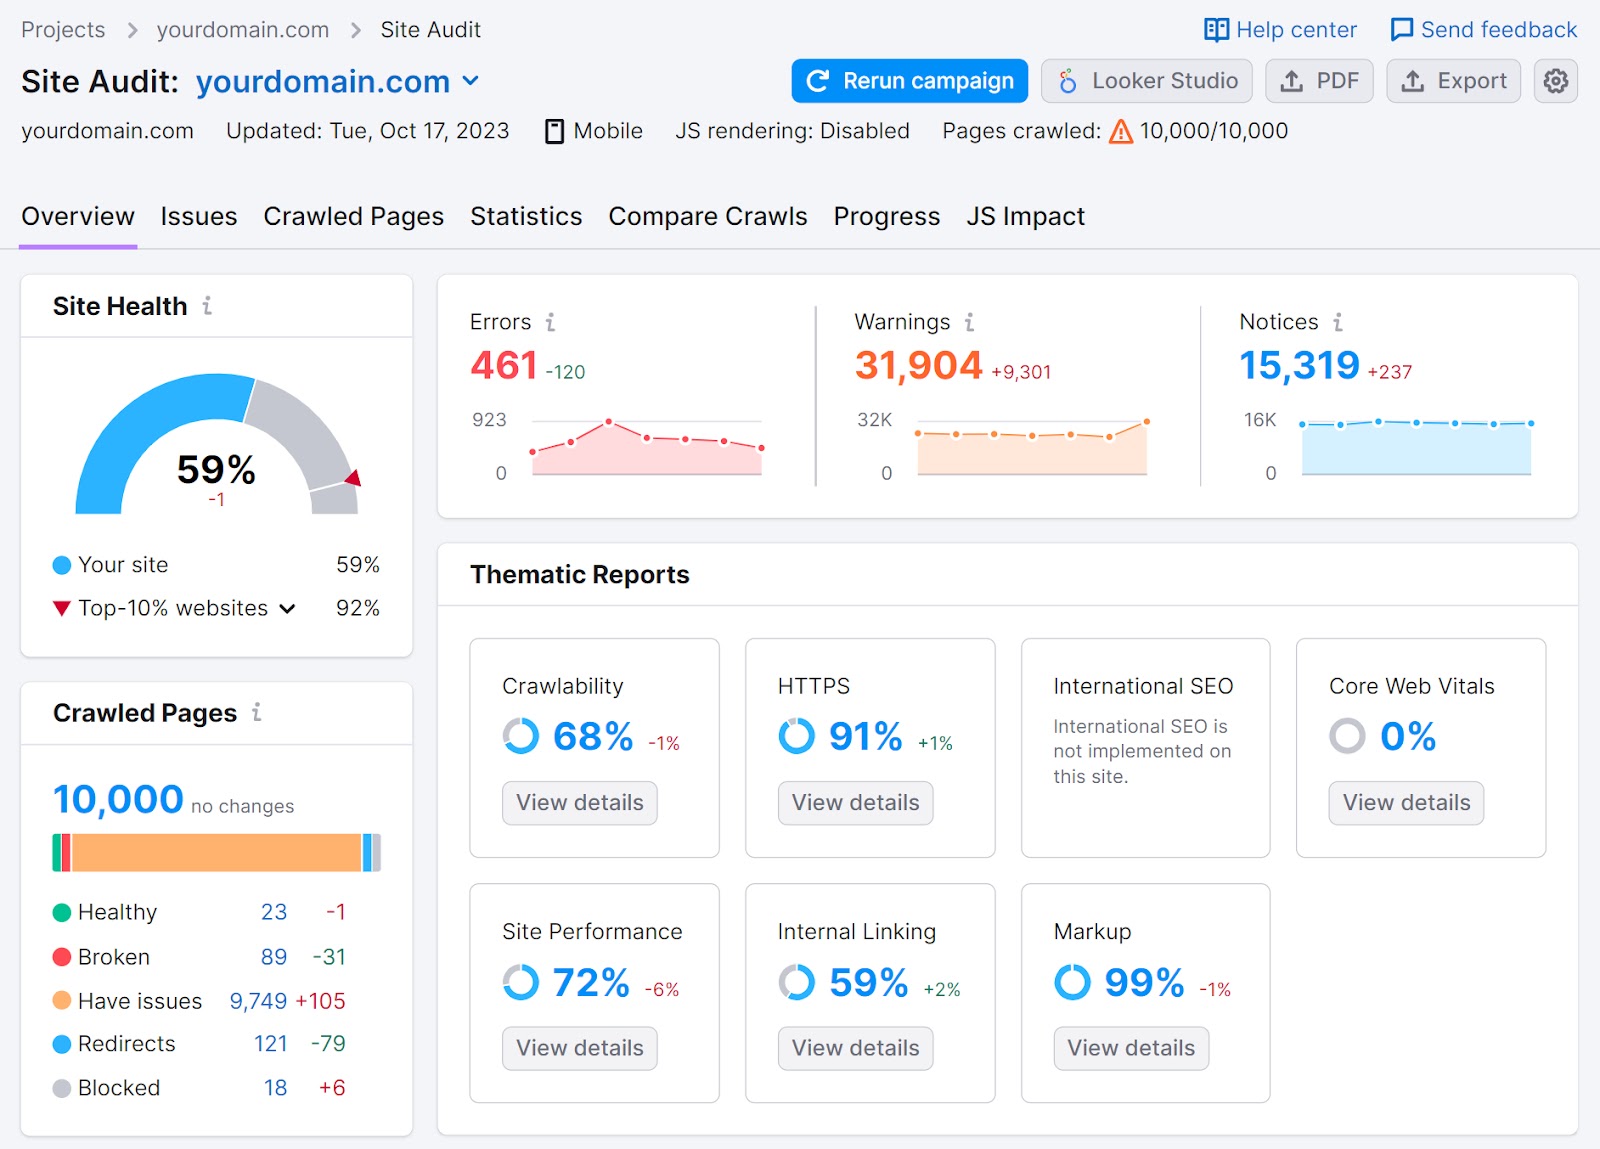 Site Audit Overview dashboard